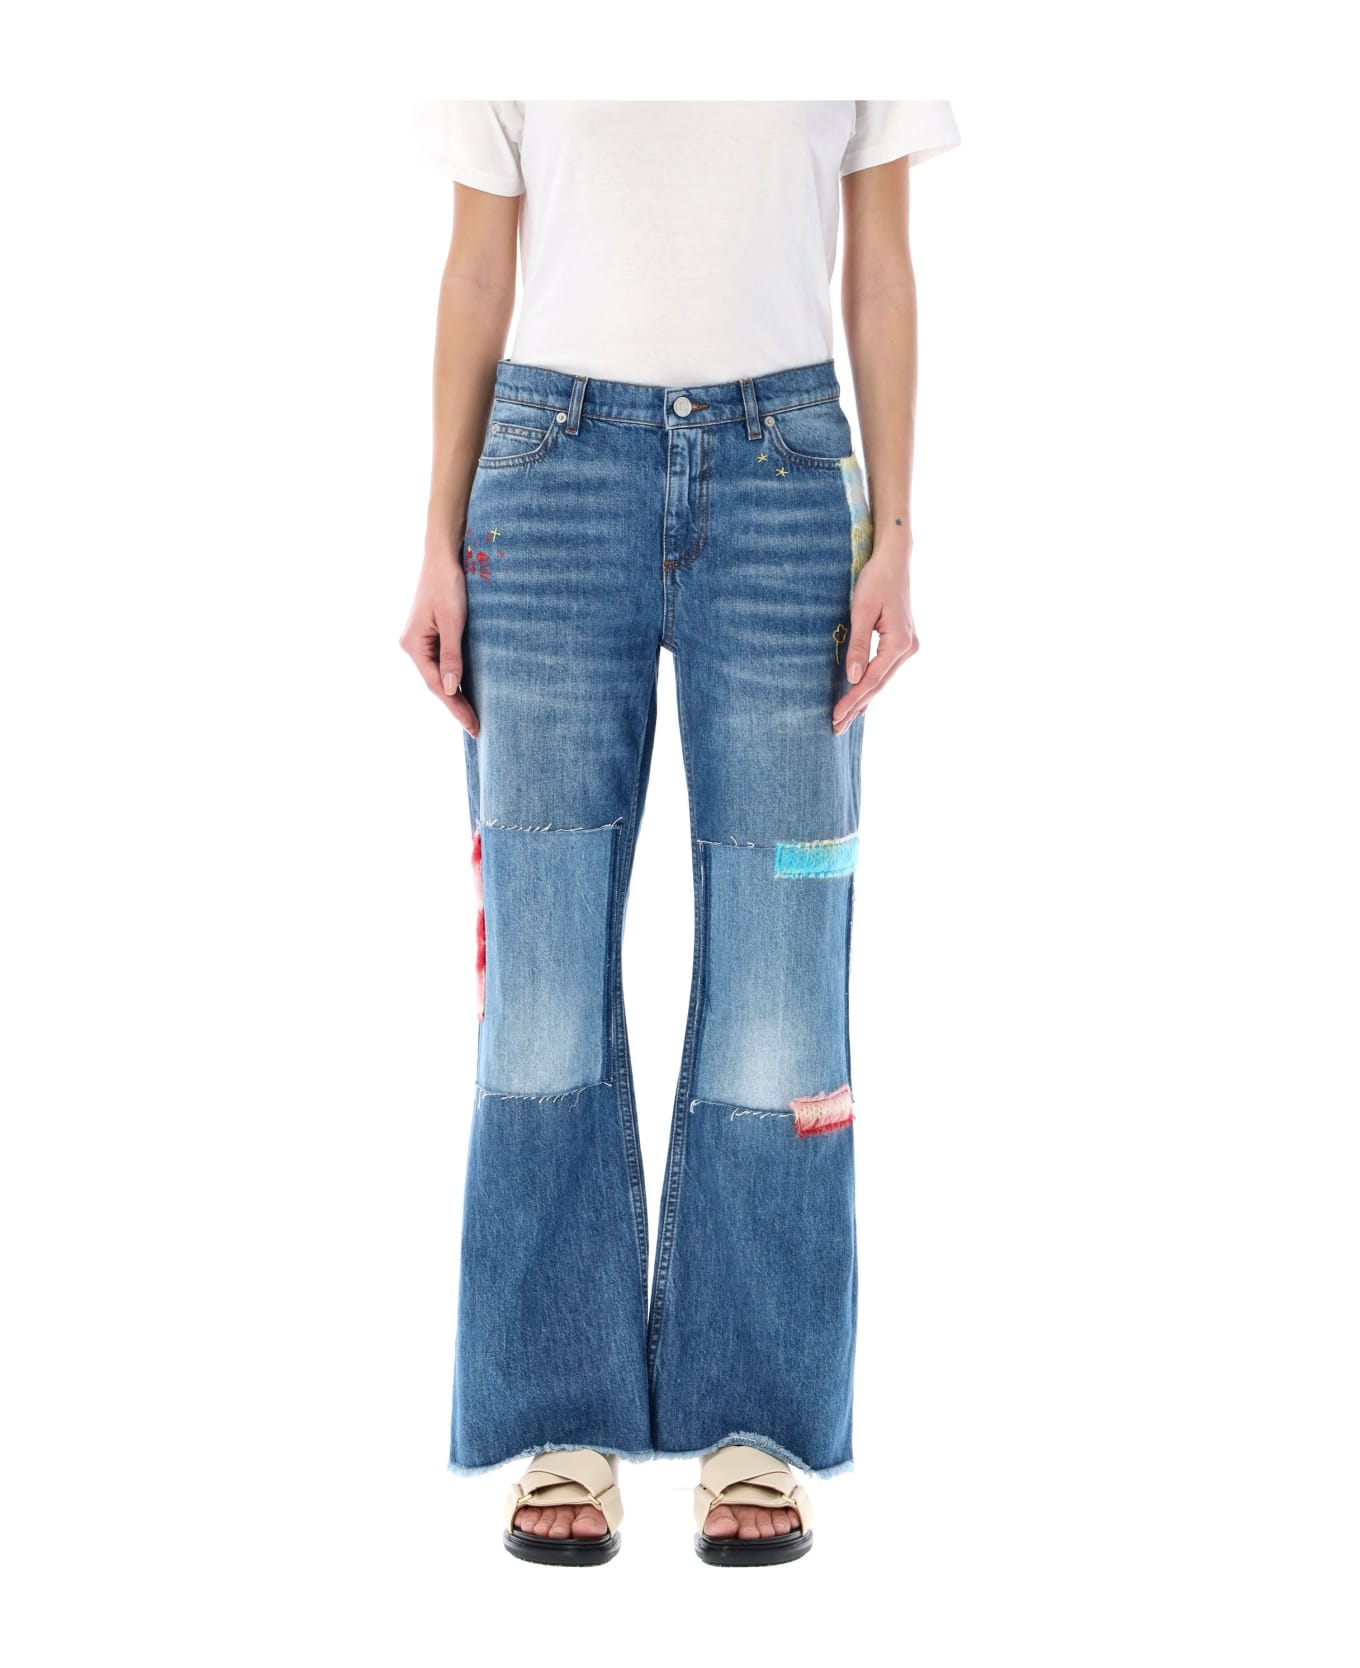 Marni Mohair Patches Jeans - BLUE MIX デニム